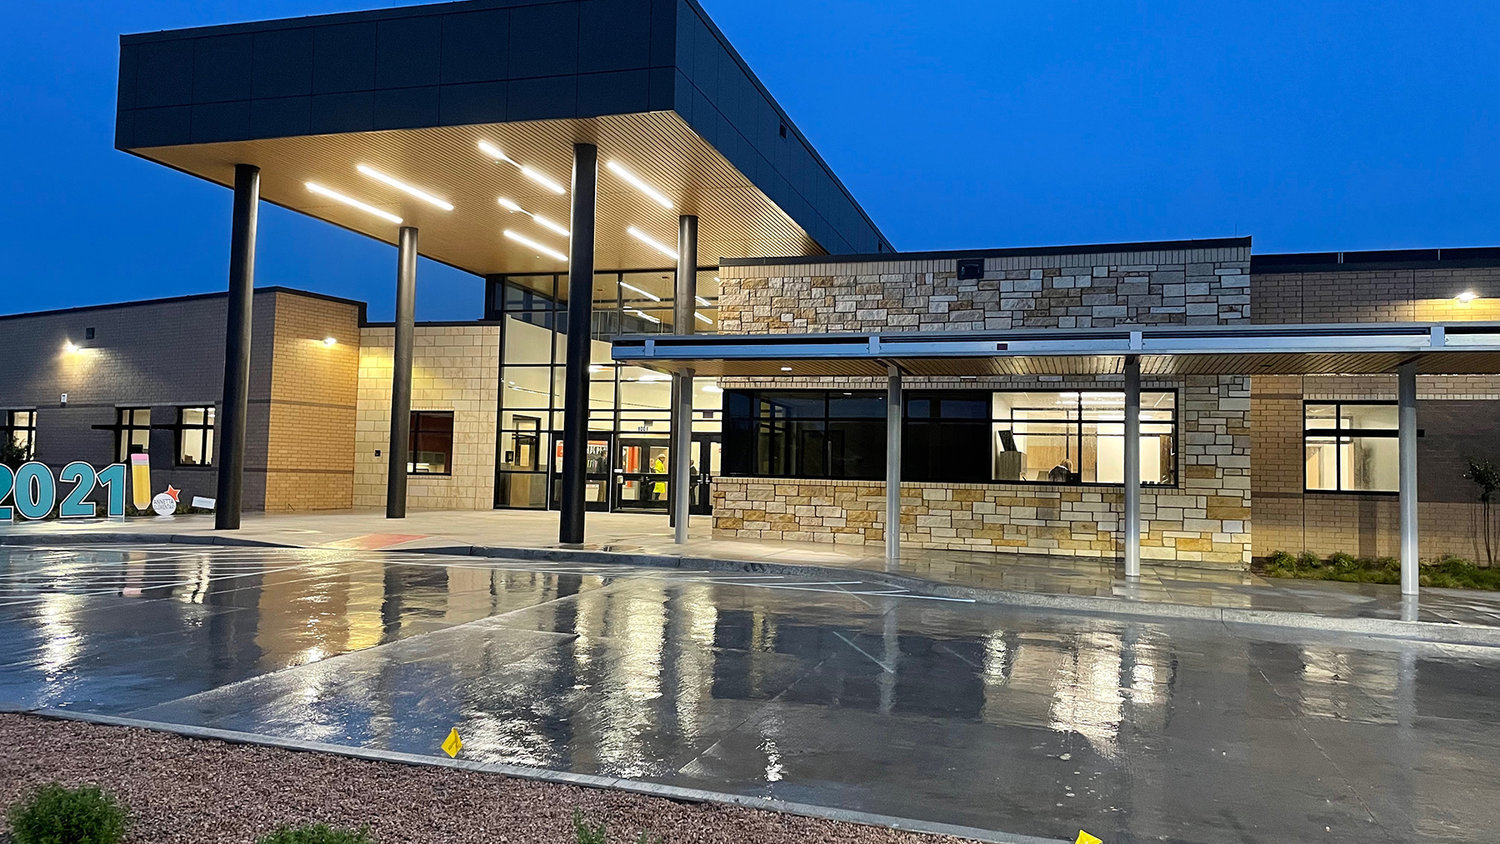 Annetta Elementary School is shown just before sunrise on its opening day in 2021.